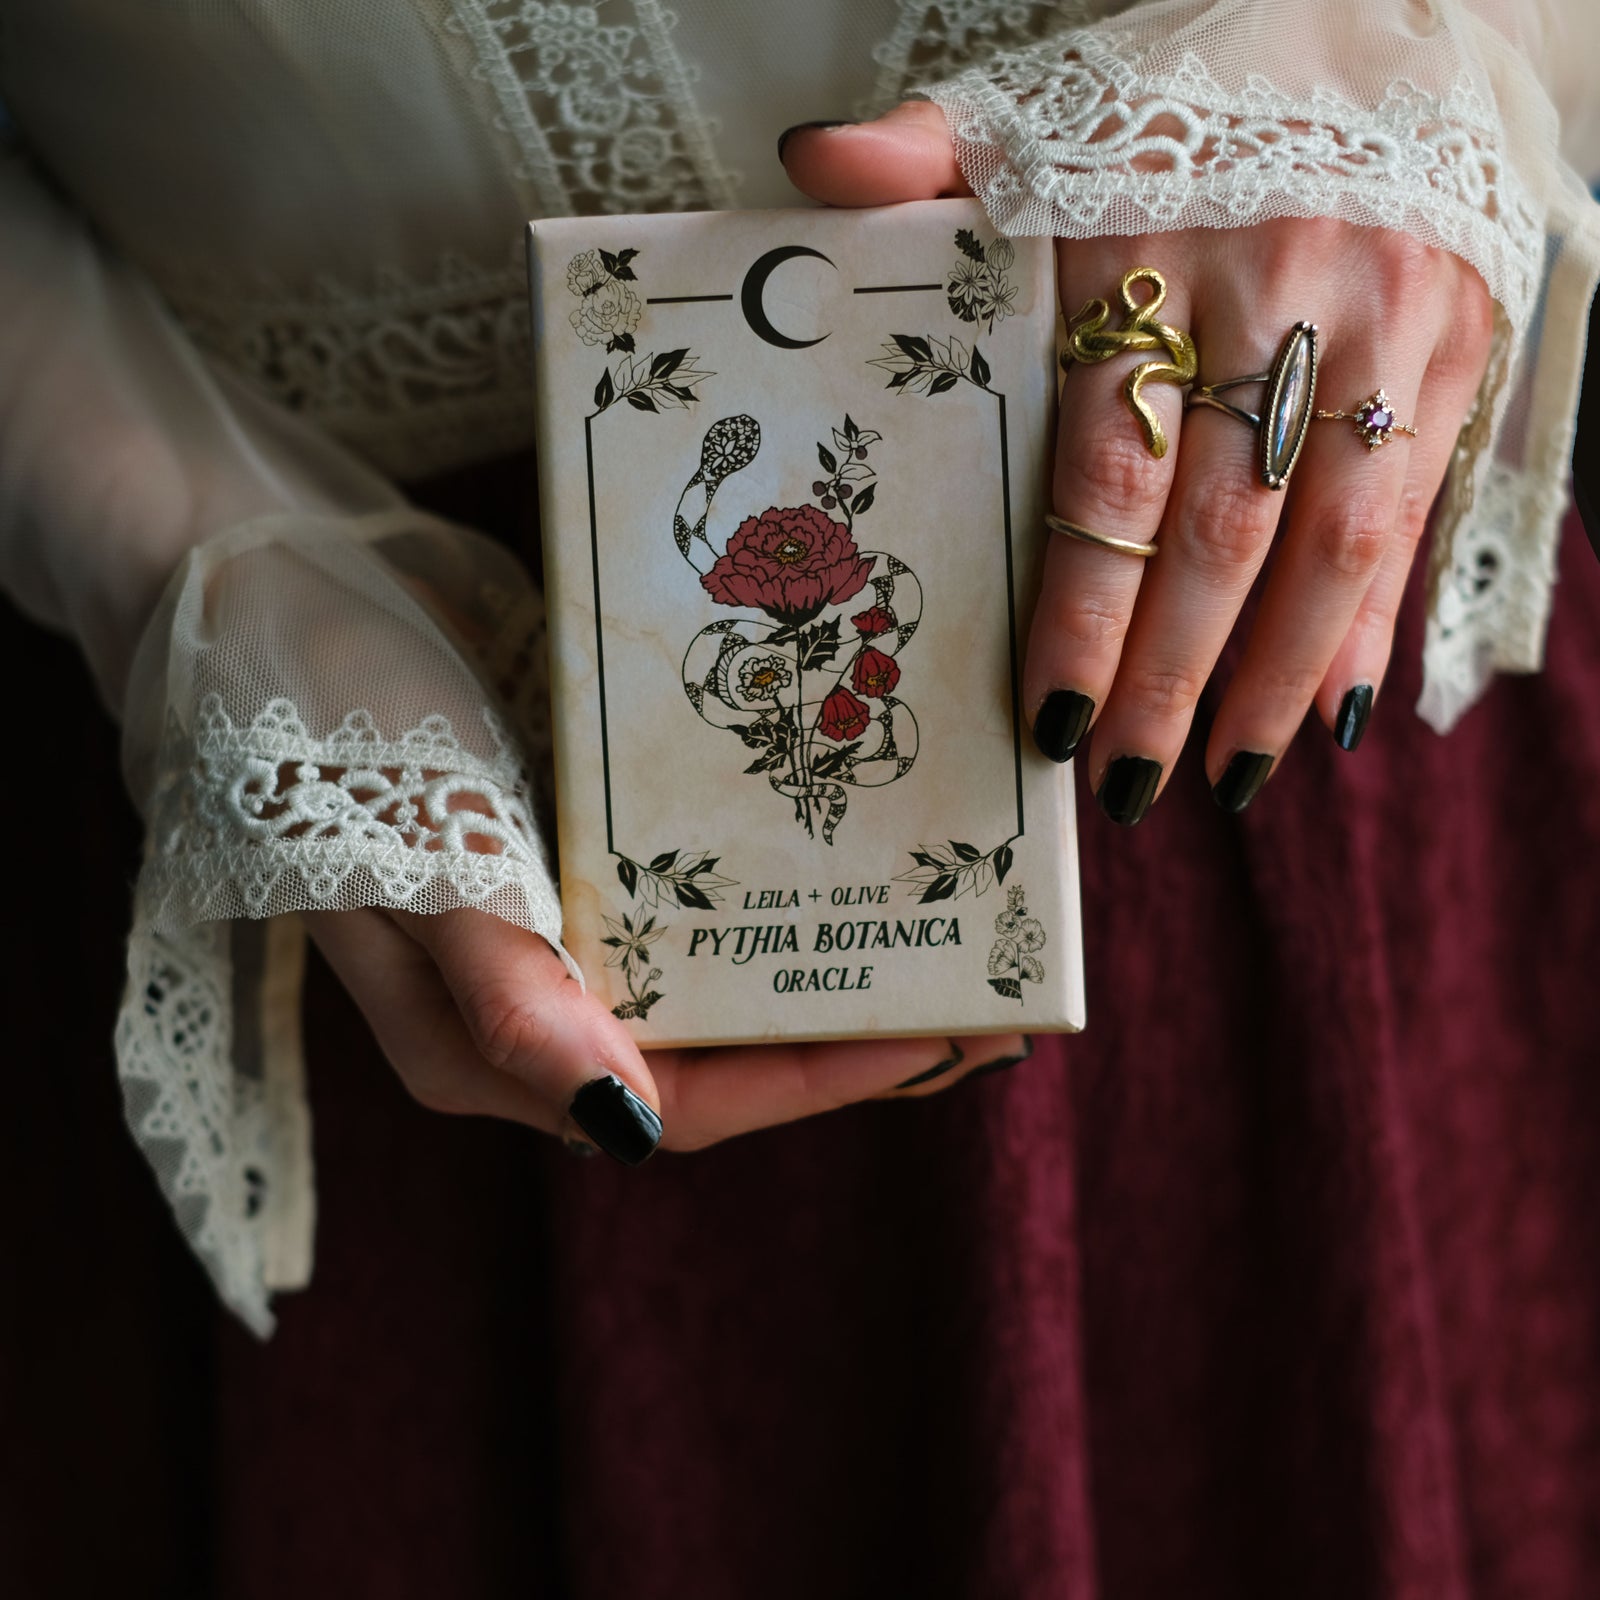 The Botanical Oracle deck, Pythia Botanica, is rooted in plant magic and seeks meaning in mythology.